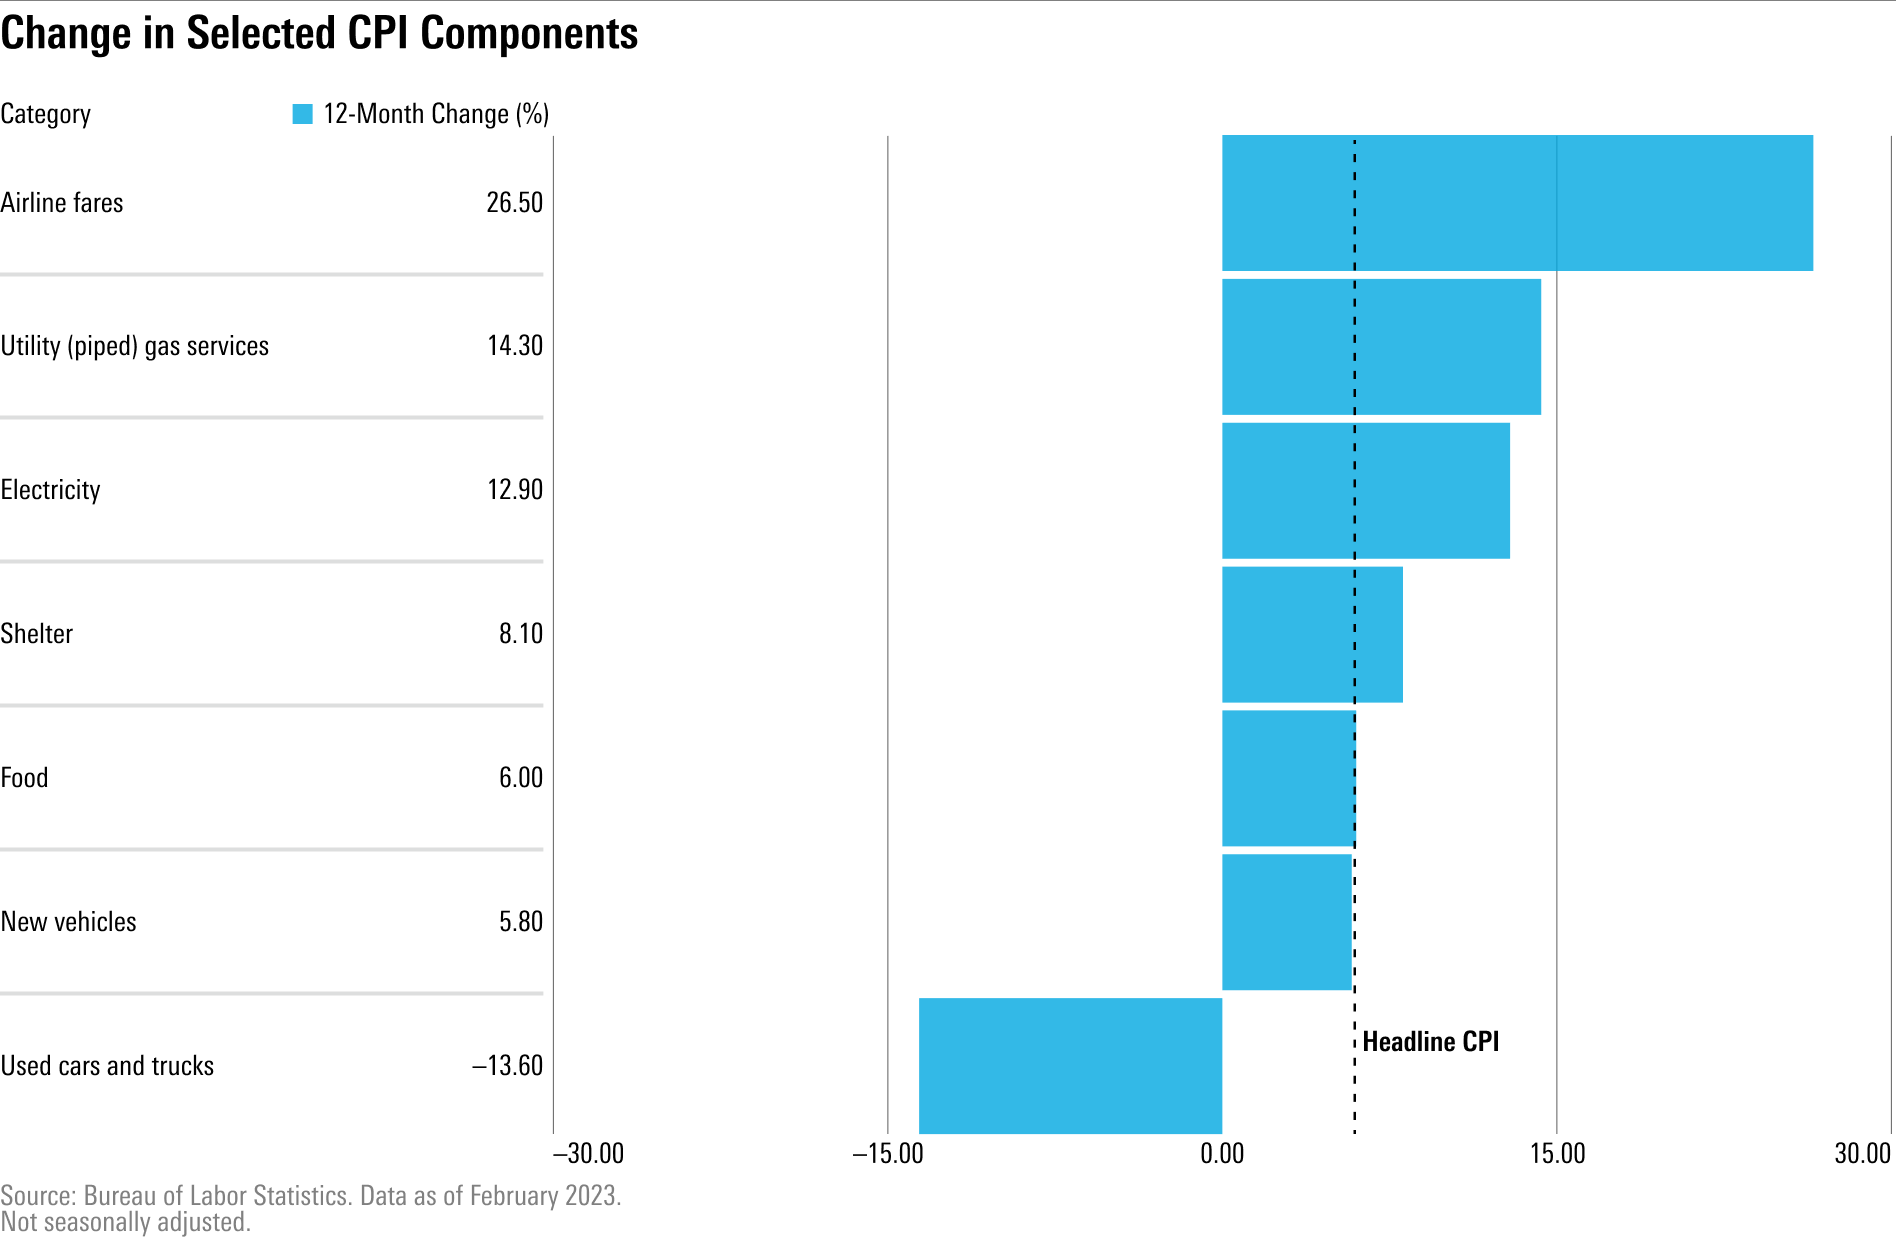 Bar chart showing 12-month % changes in key CPI components.